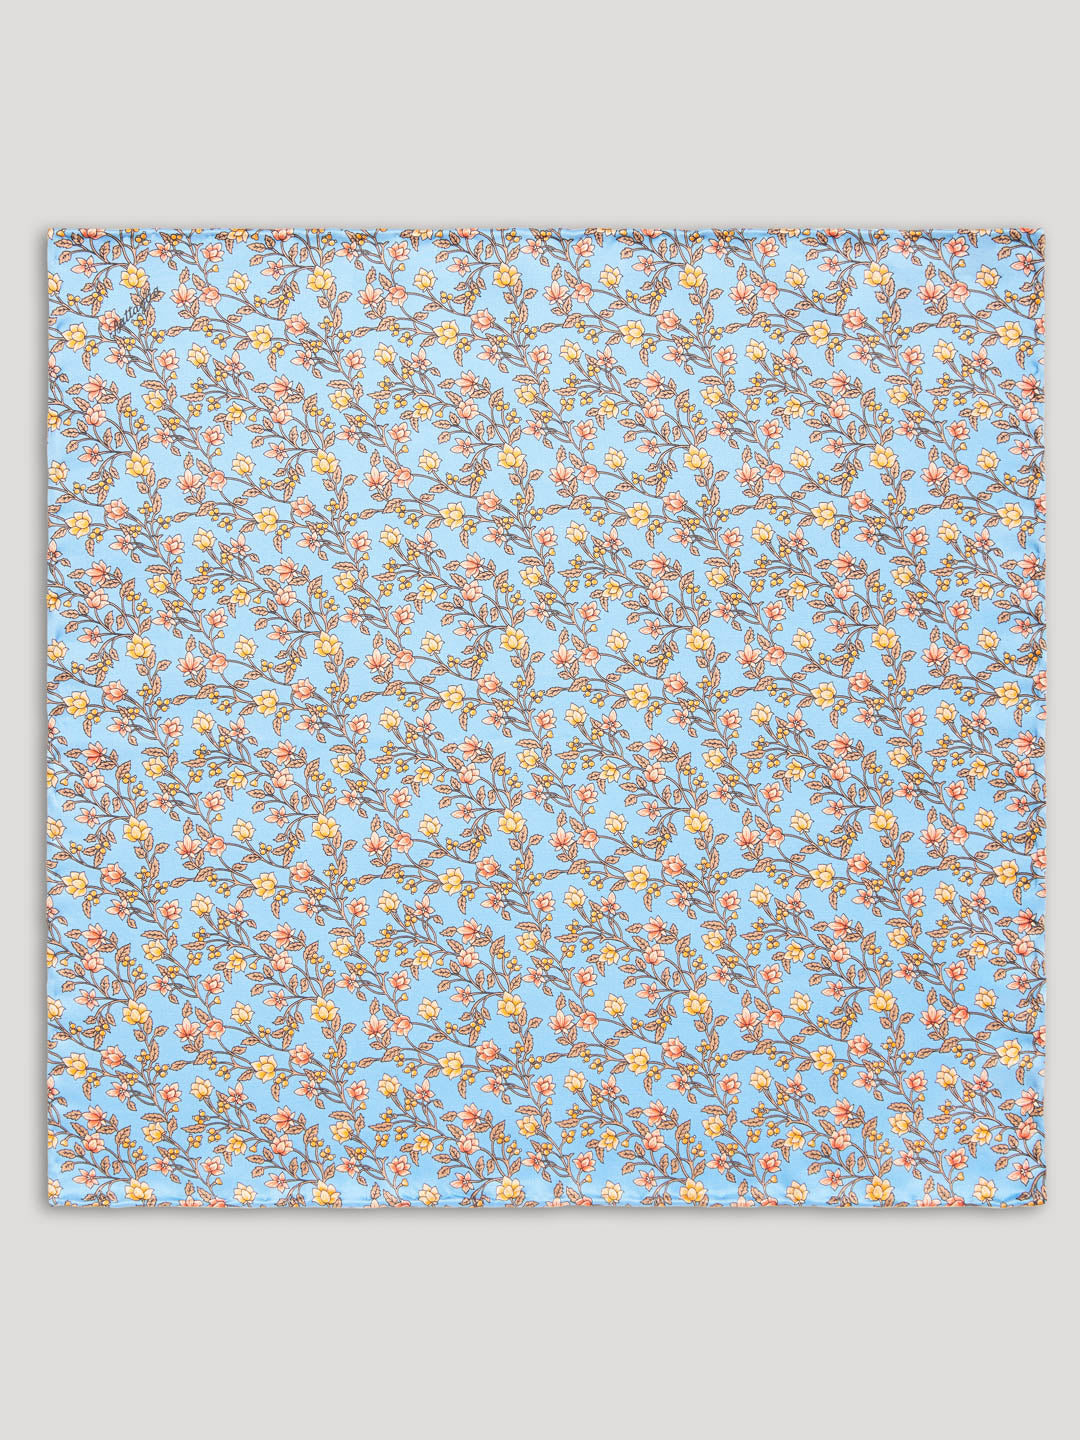 Light blue handkerchief with yellow and orange floral details. 